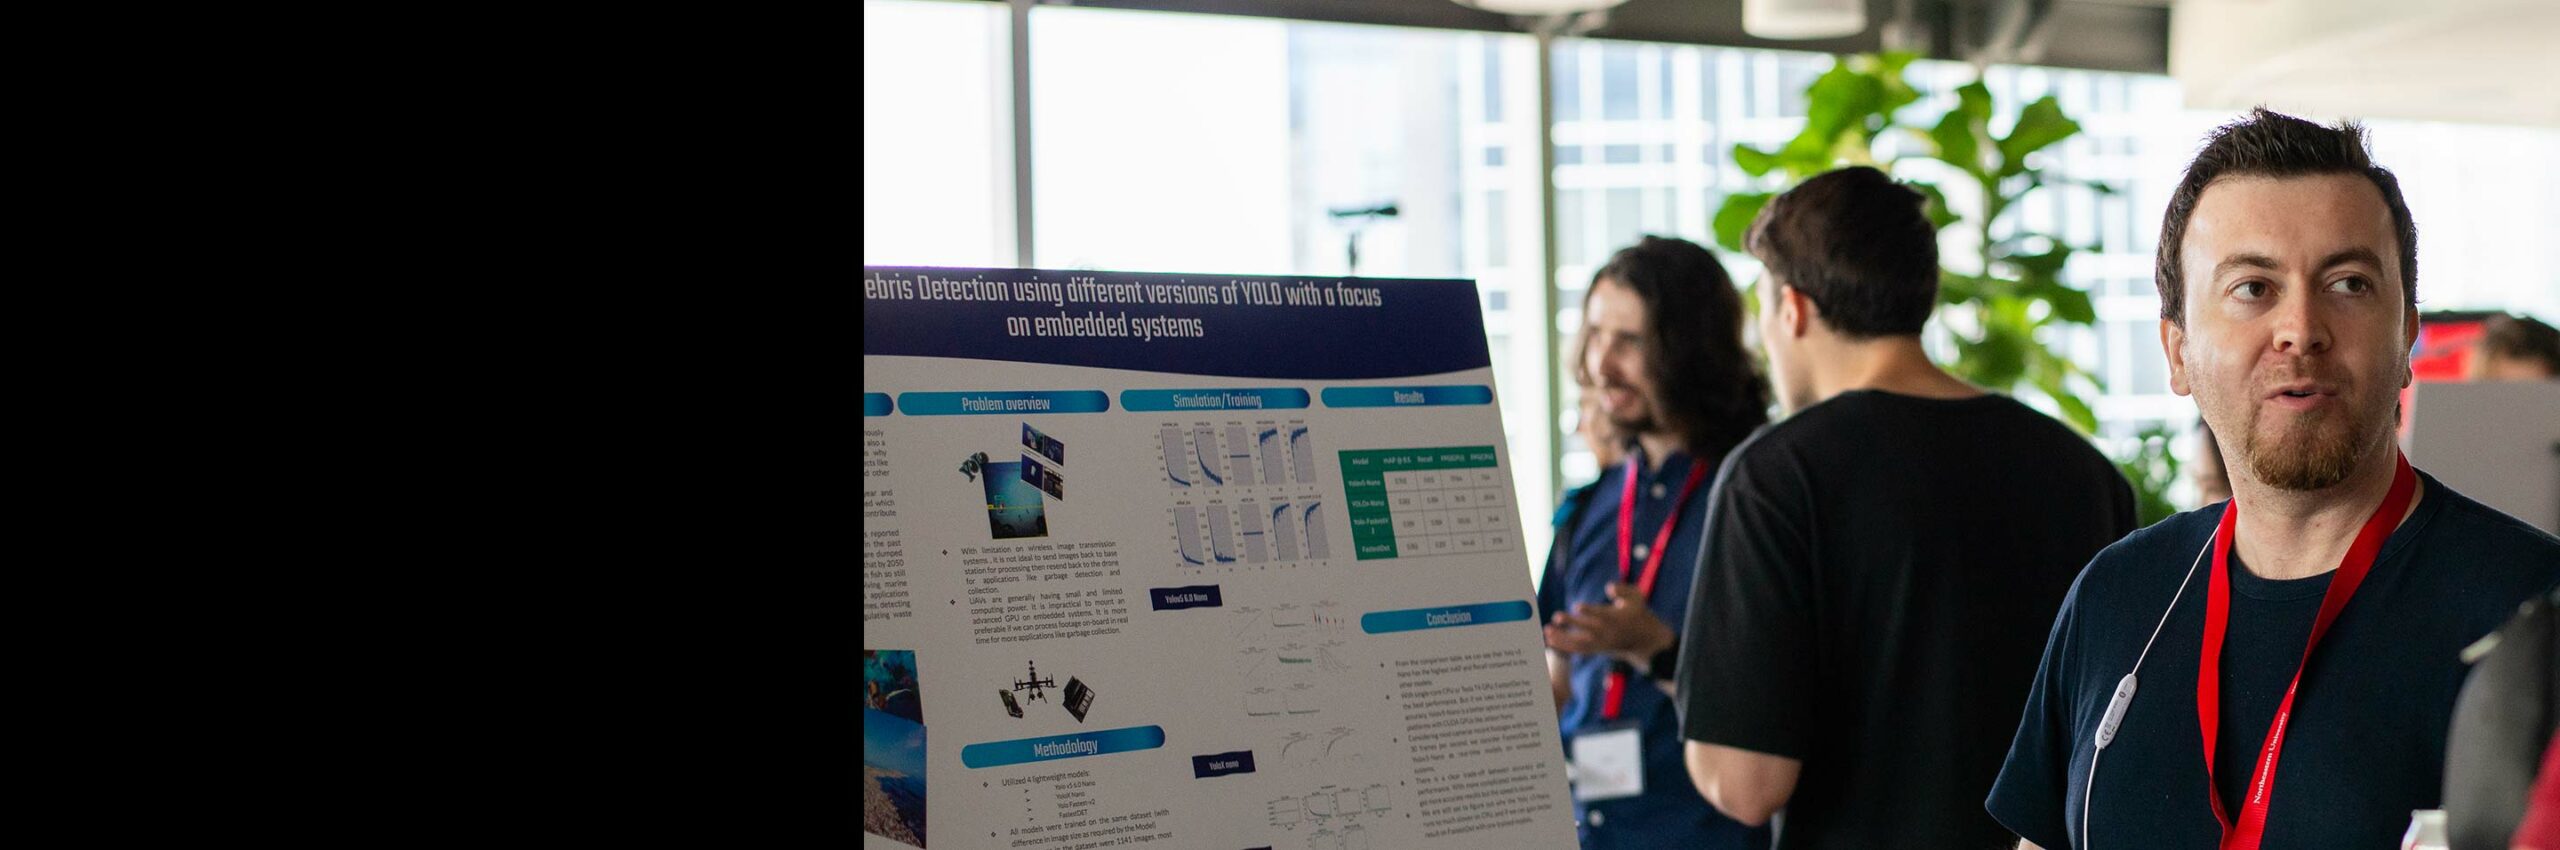 a Vancouver student describes a research poster